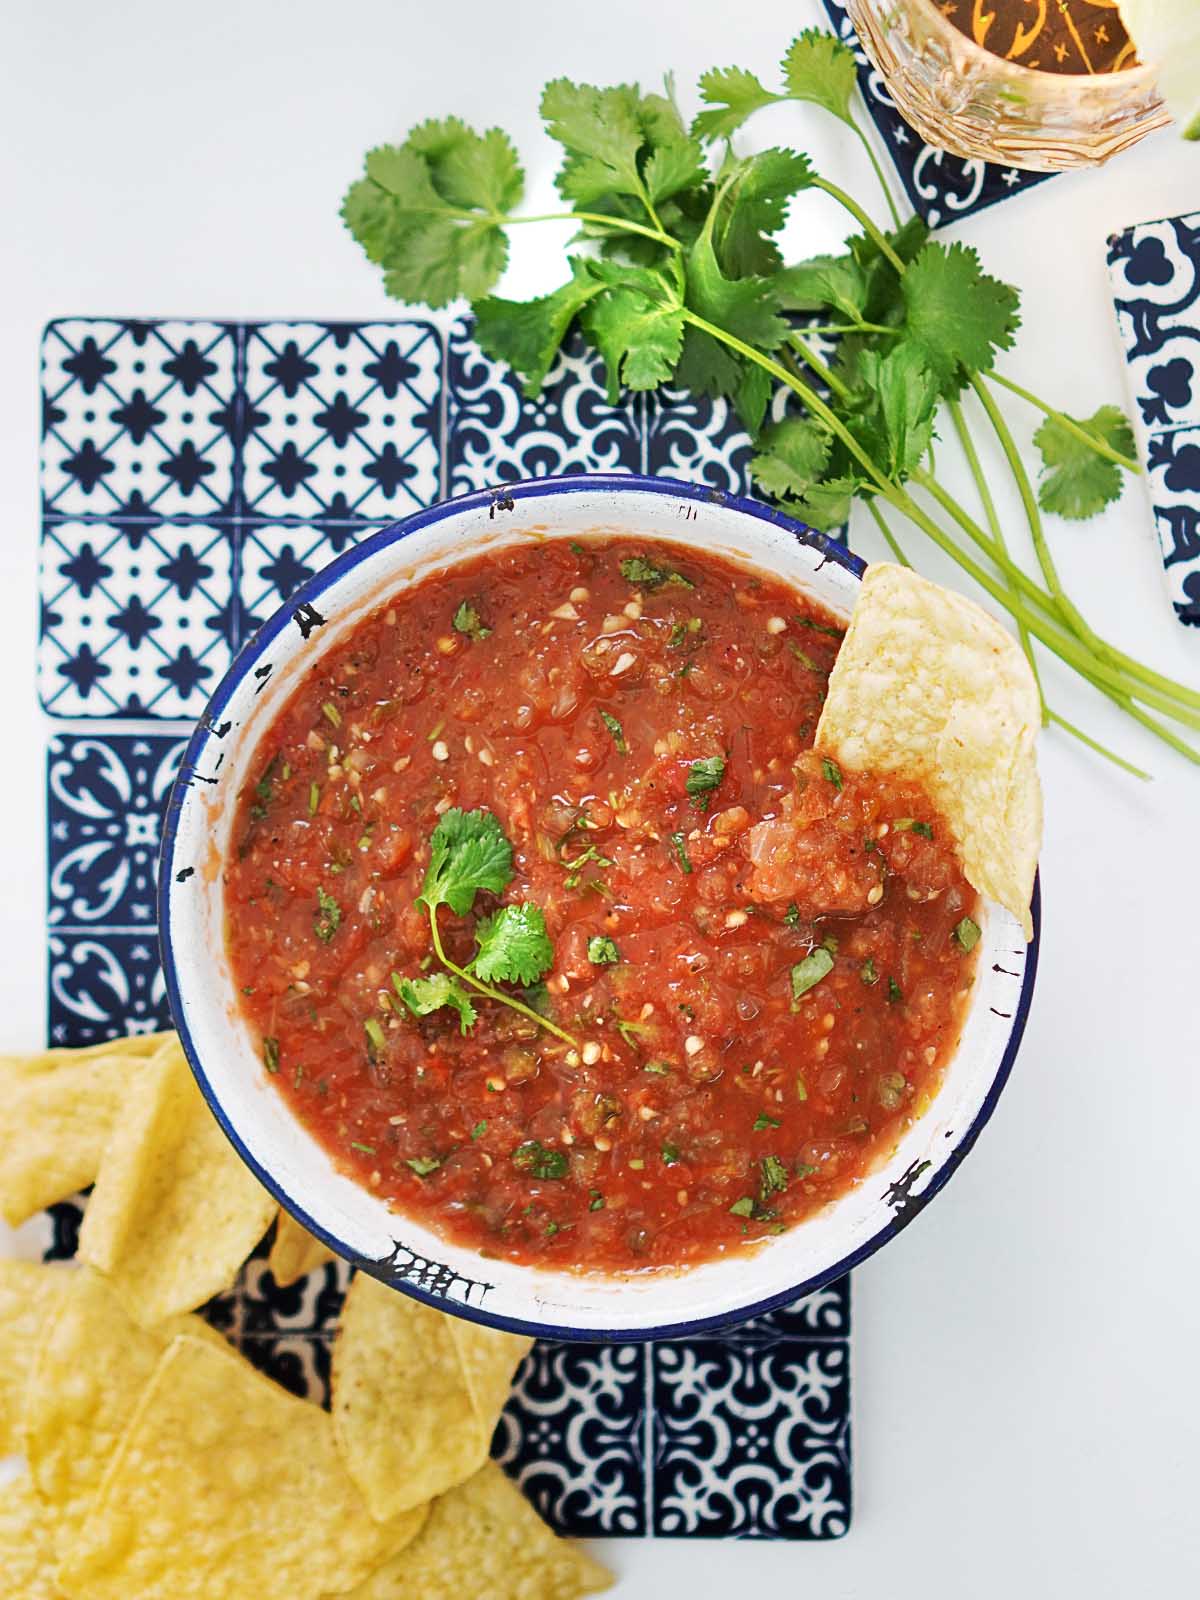 A bowl of red salsa placed on top of blue decorative tiles and chips and cilantro on the side.